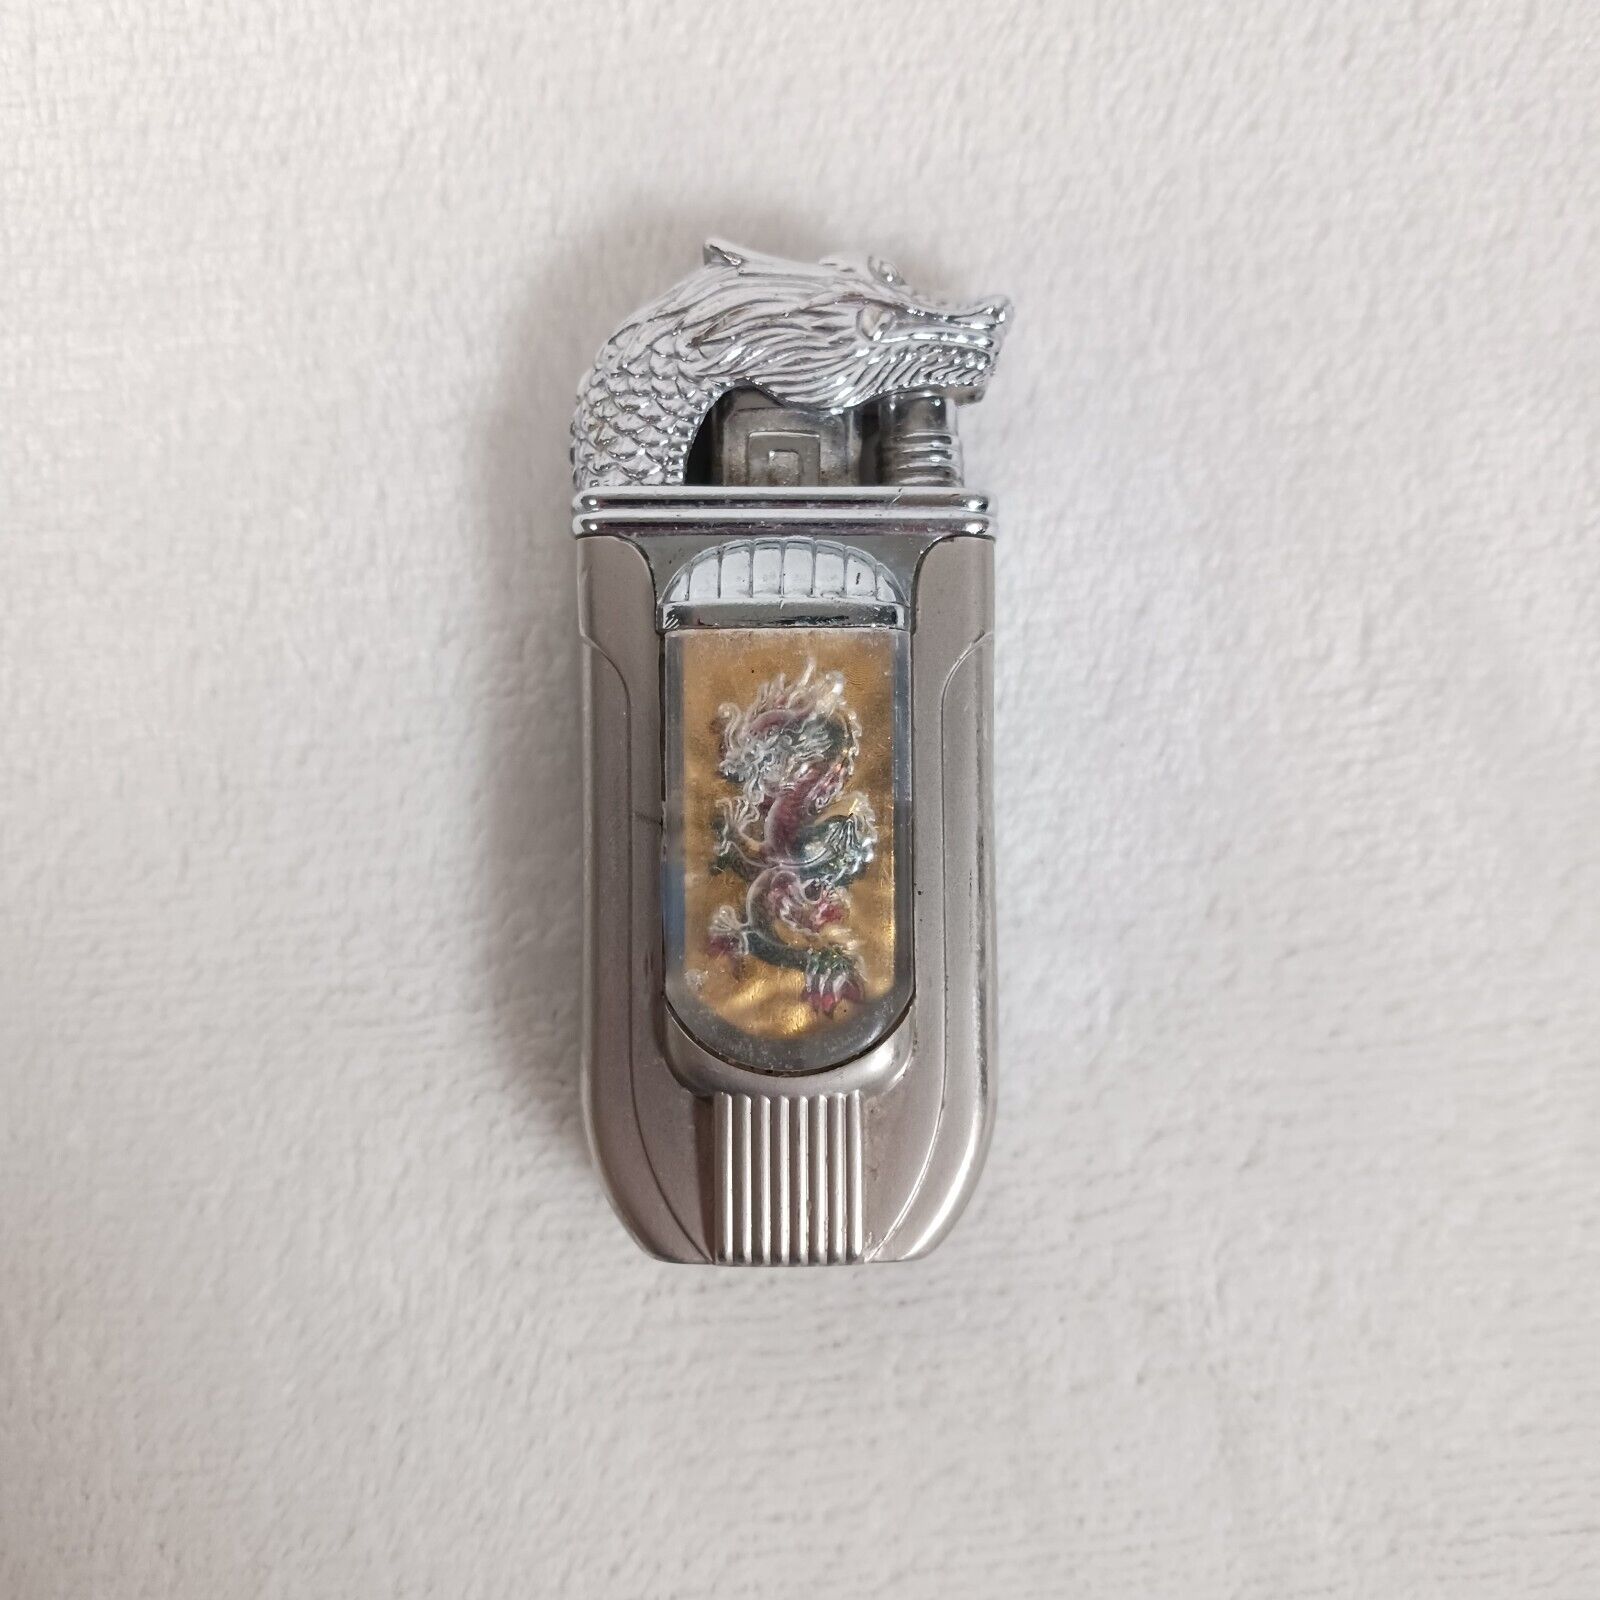 Vintage Looking Dragon Metallic Lighter With A Cool Design